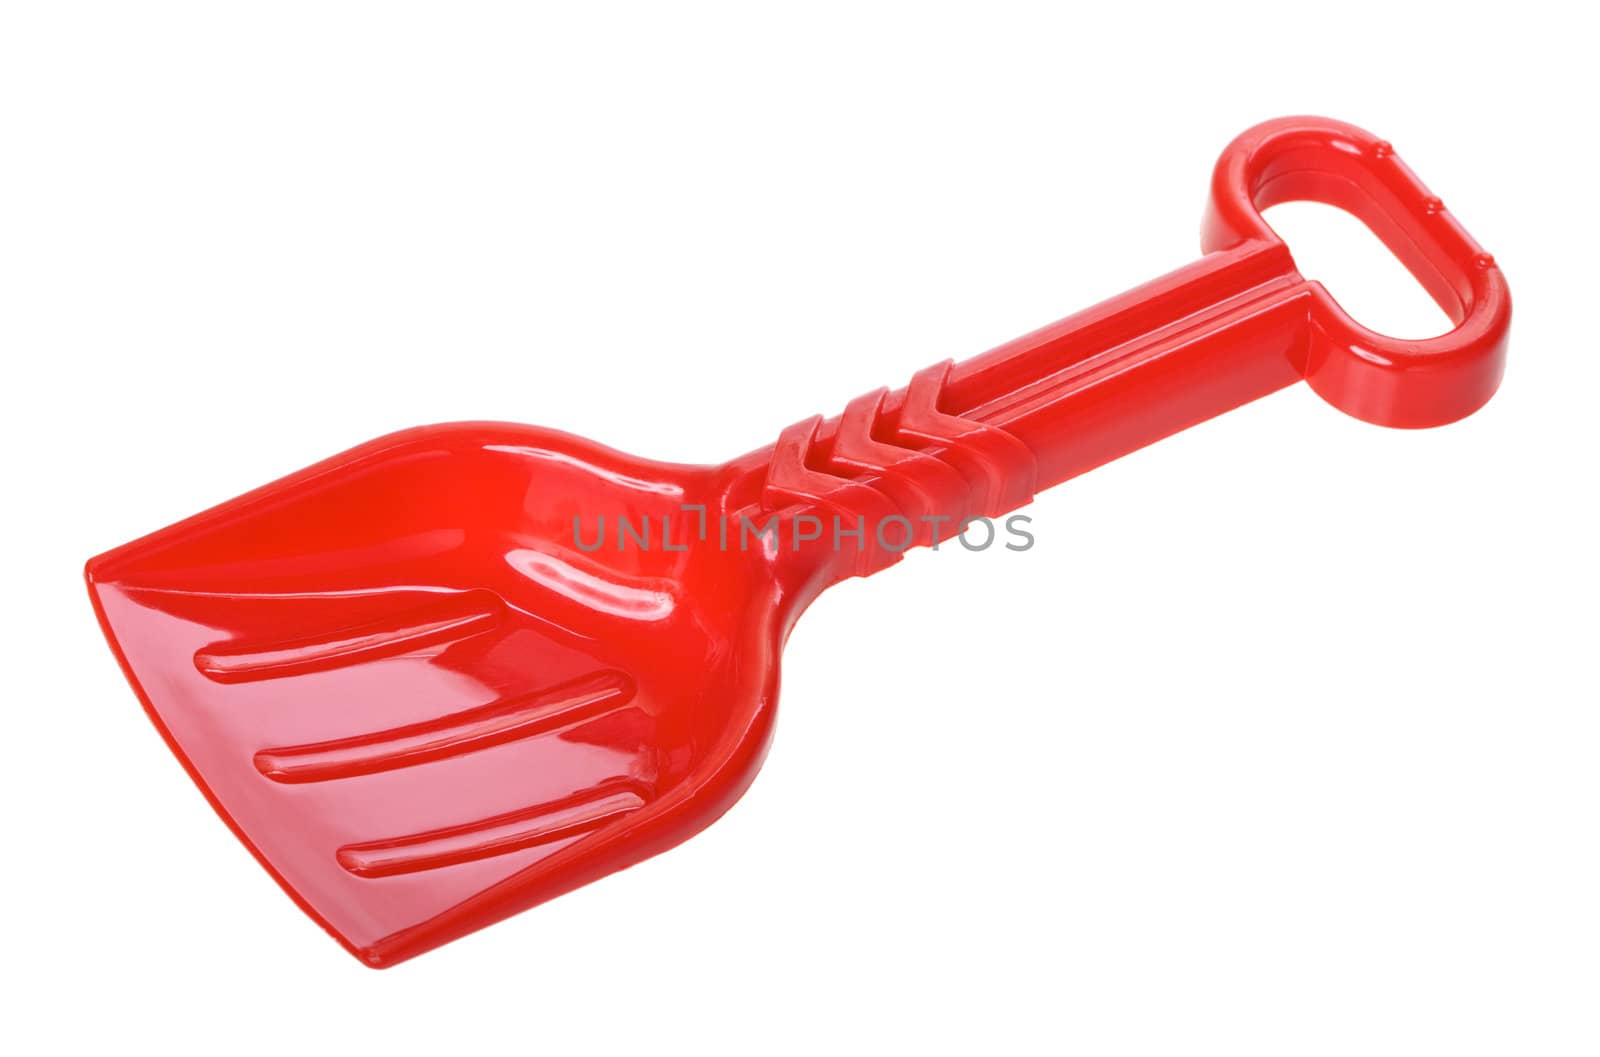 red toy scoop, isolated on white background